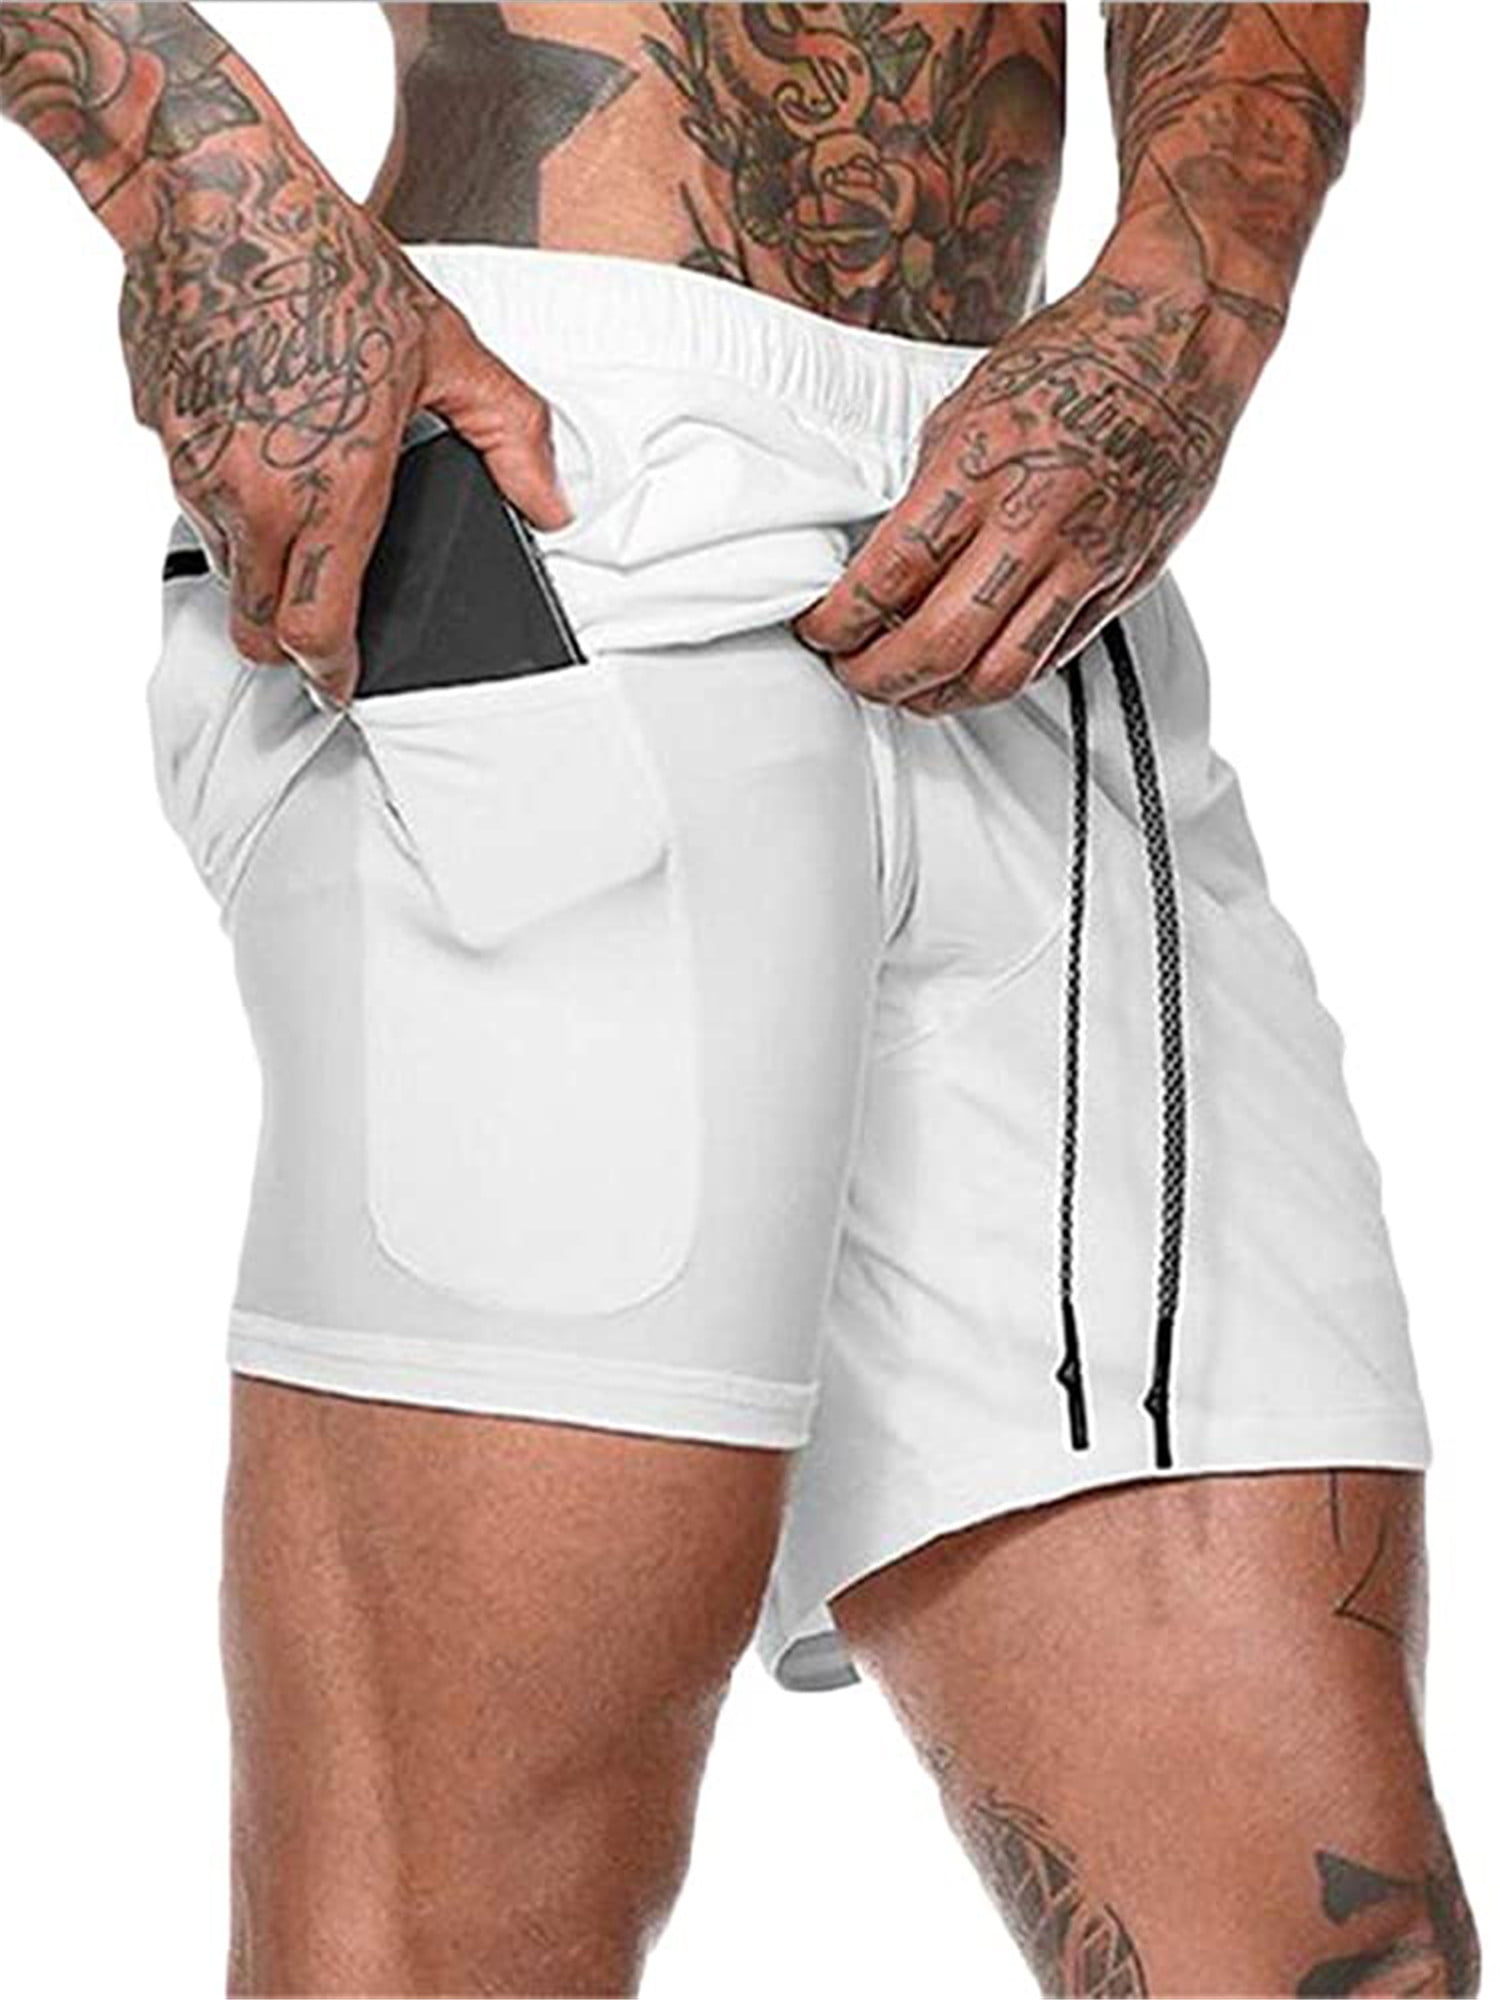 LABEYZON Men's Outdoor 2 in 1 Running Shorts Quick Dry Workout Gym Athletic Training Shorts with Phone Pocket 